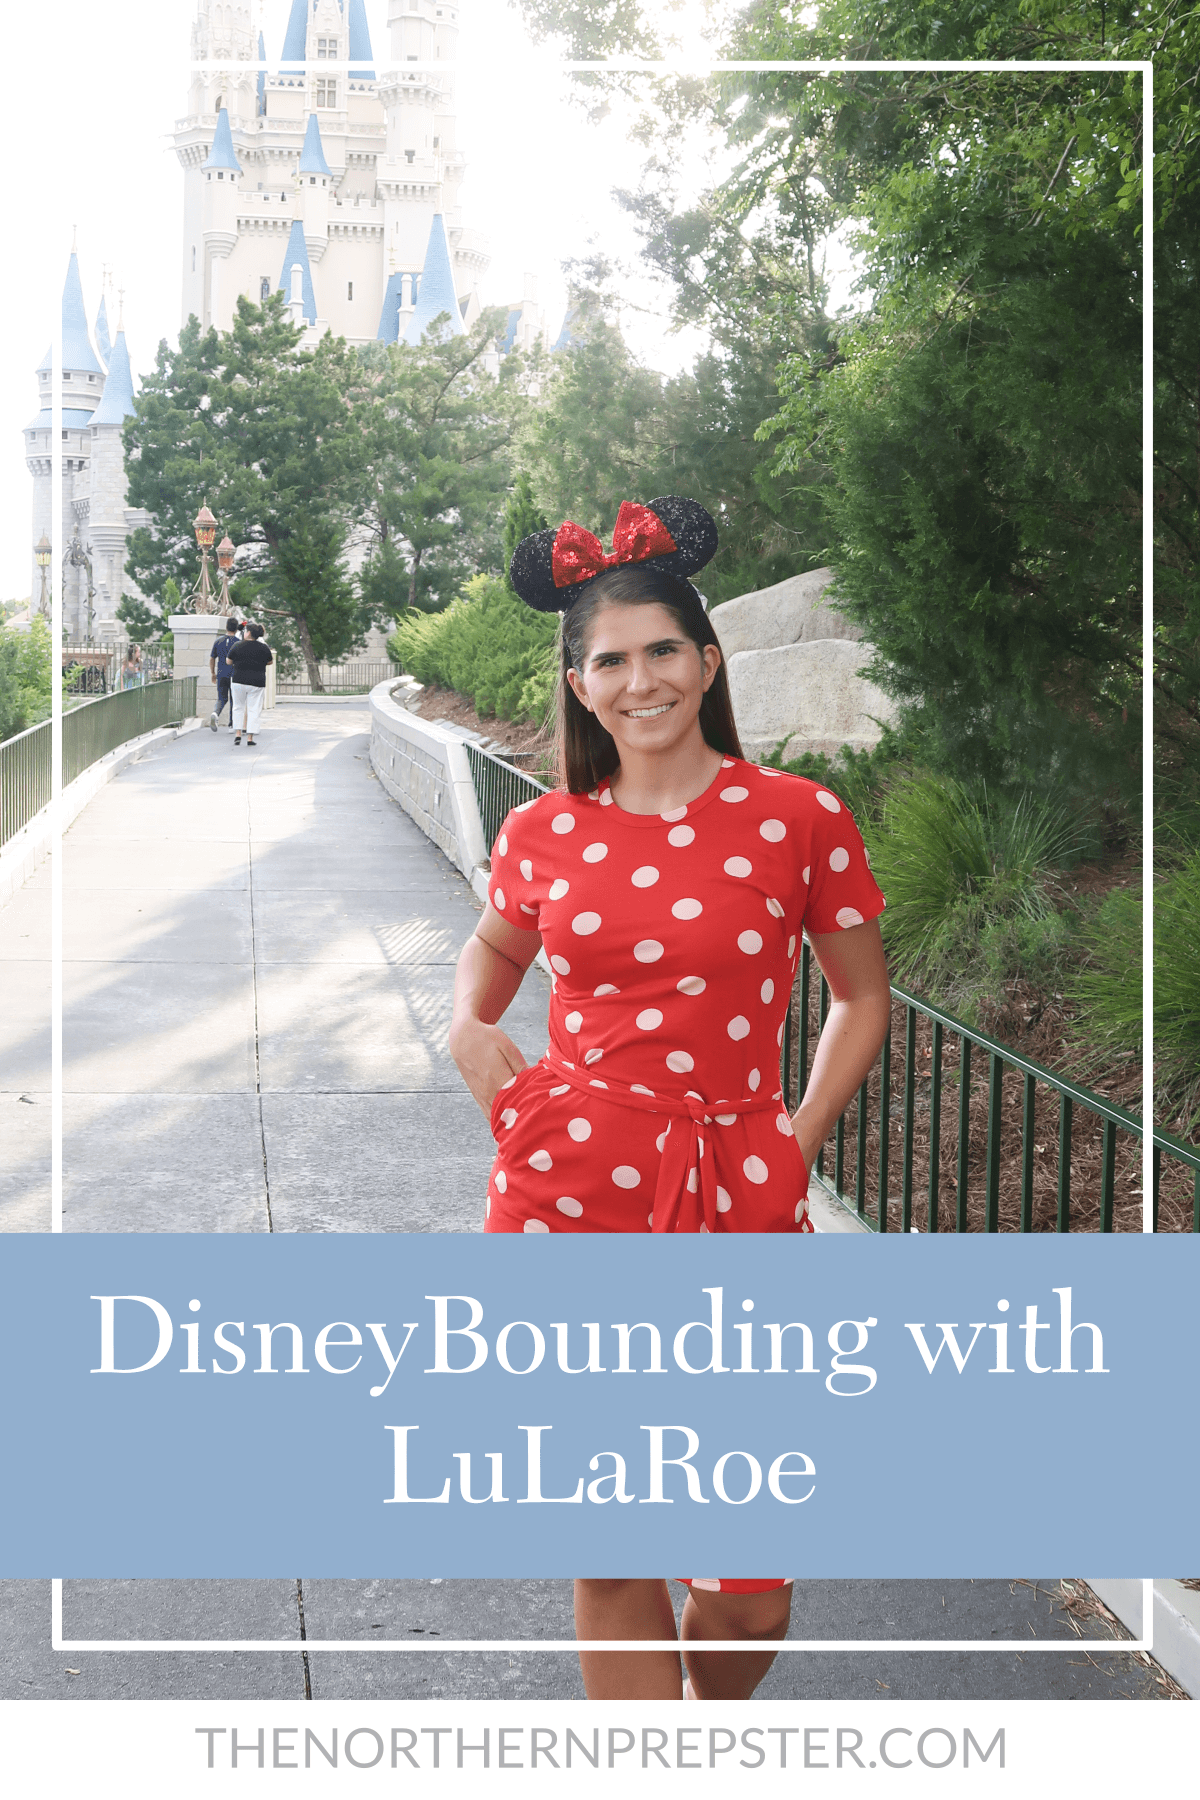 DisneyBounding with LuLaRoe – The Northern Prepster